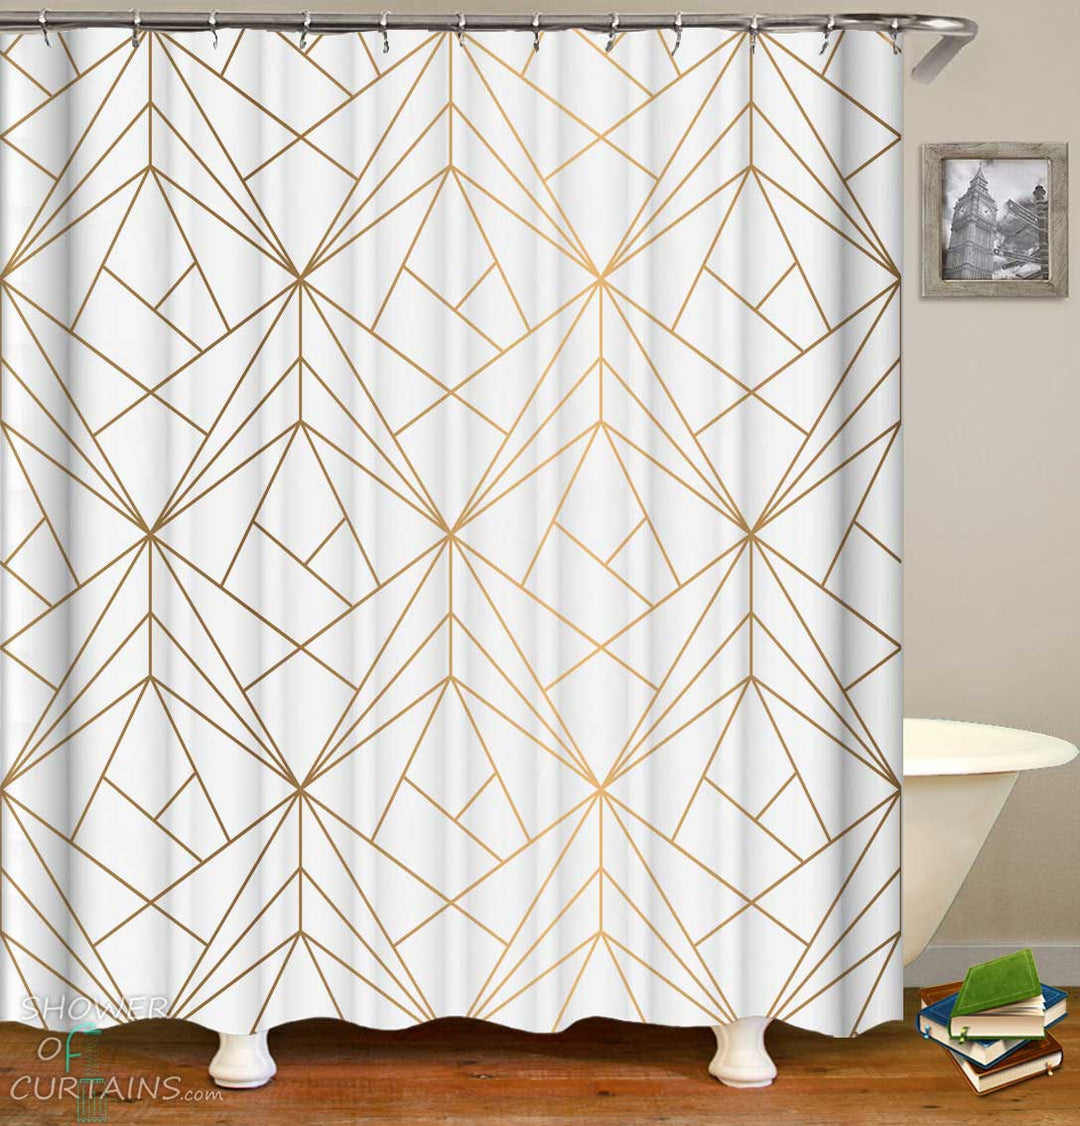 Shower Curtains with Golden Artistic Triangles